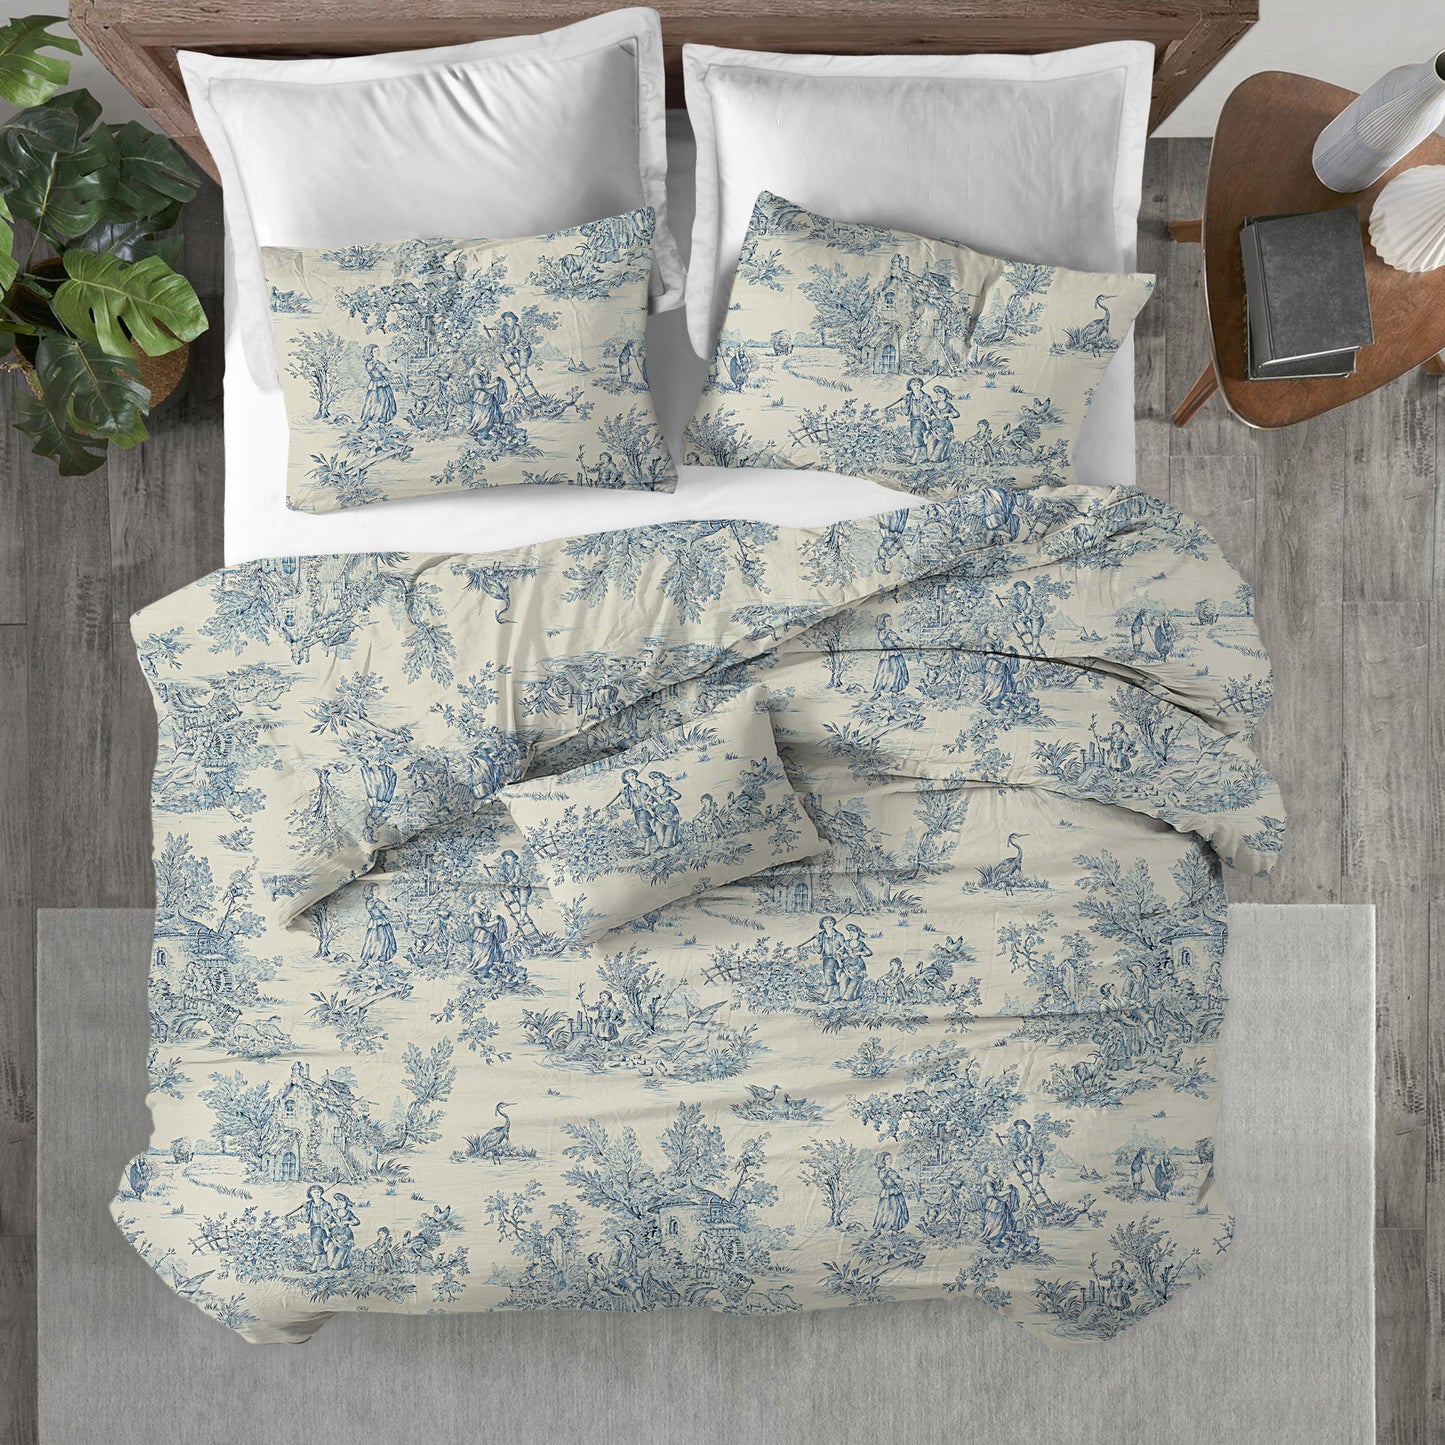 Duvet Cover in Pastorale #2 Blue on Cream French Country Toile